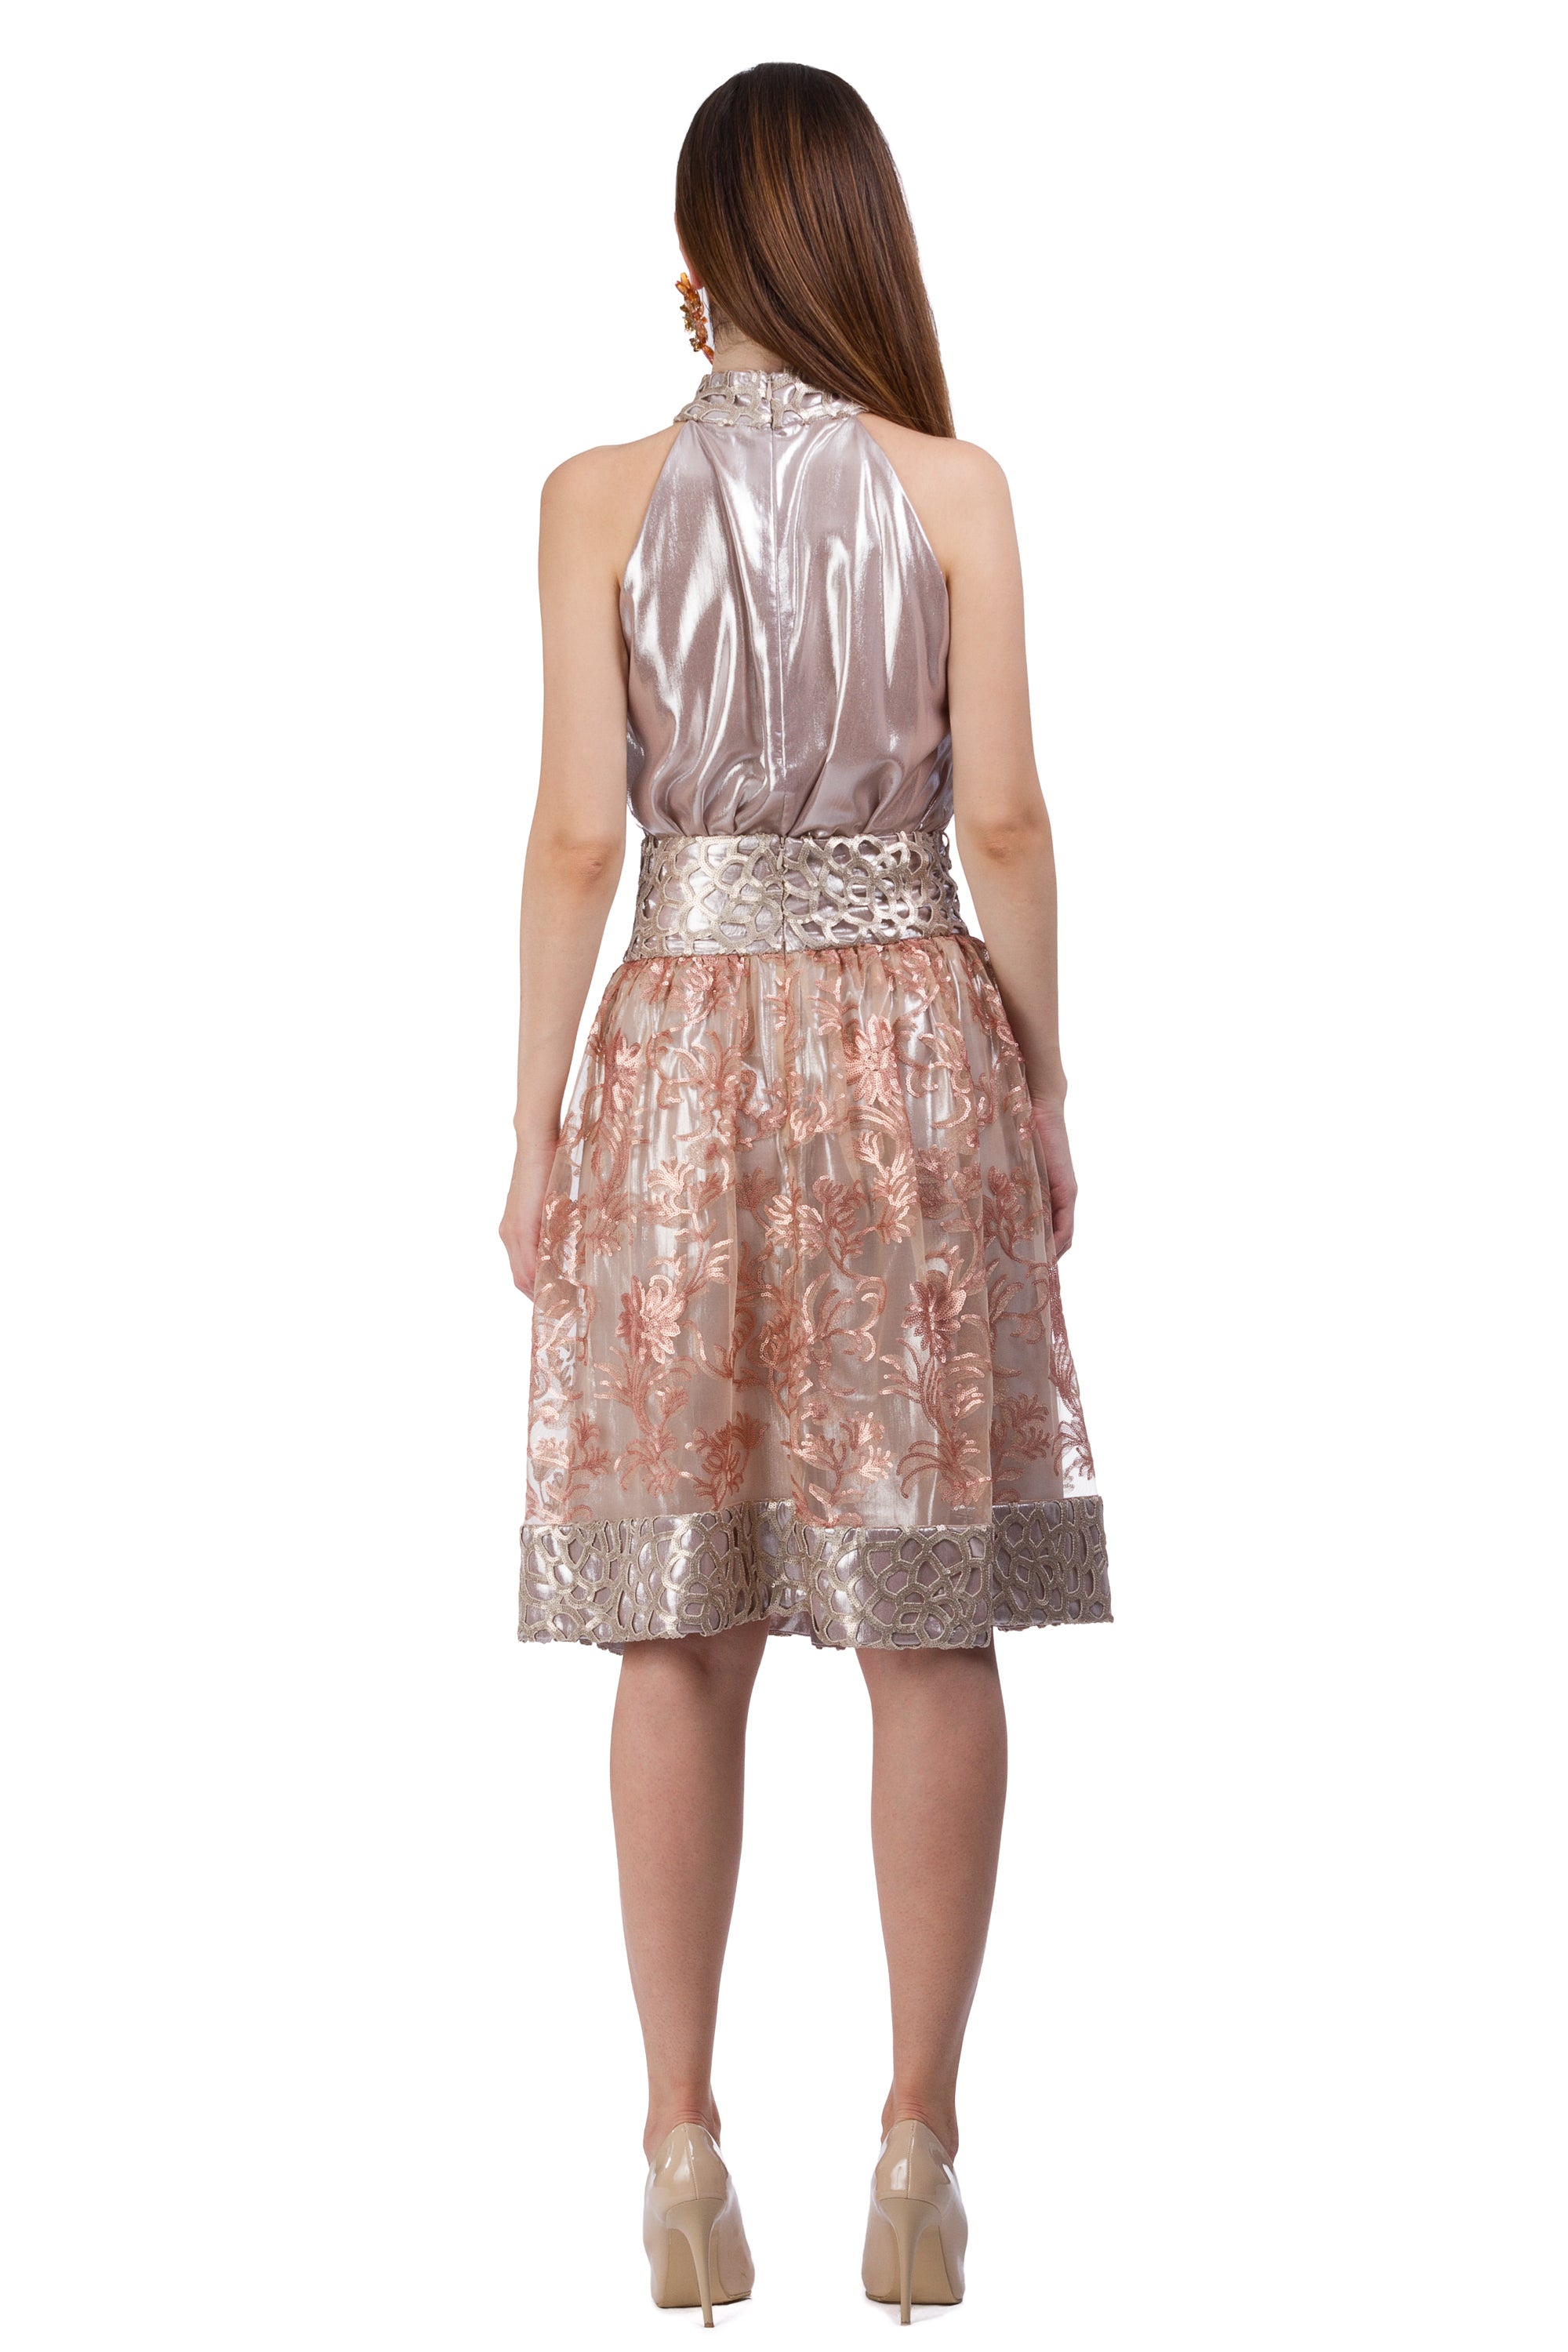 Lace skirt with fine gold and copper floral elements